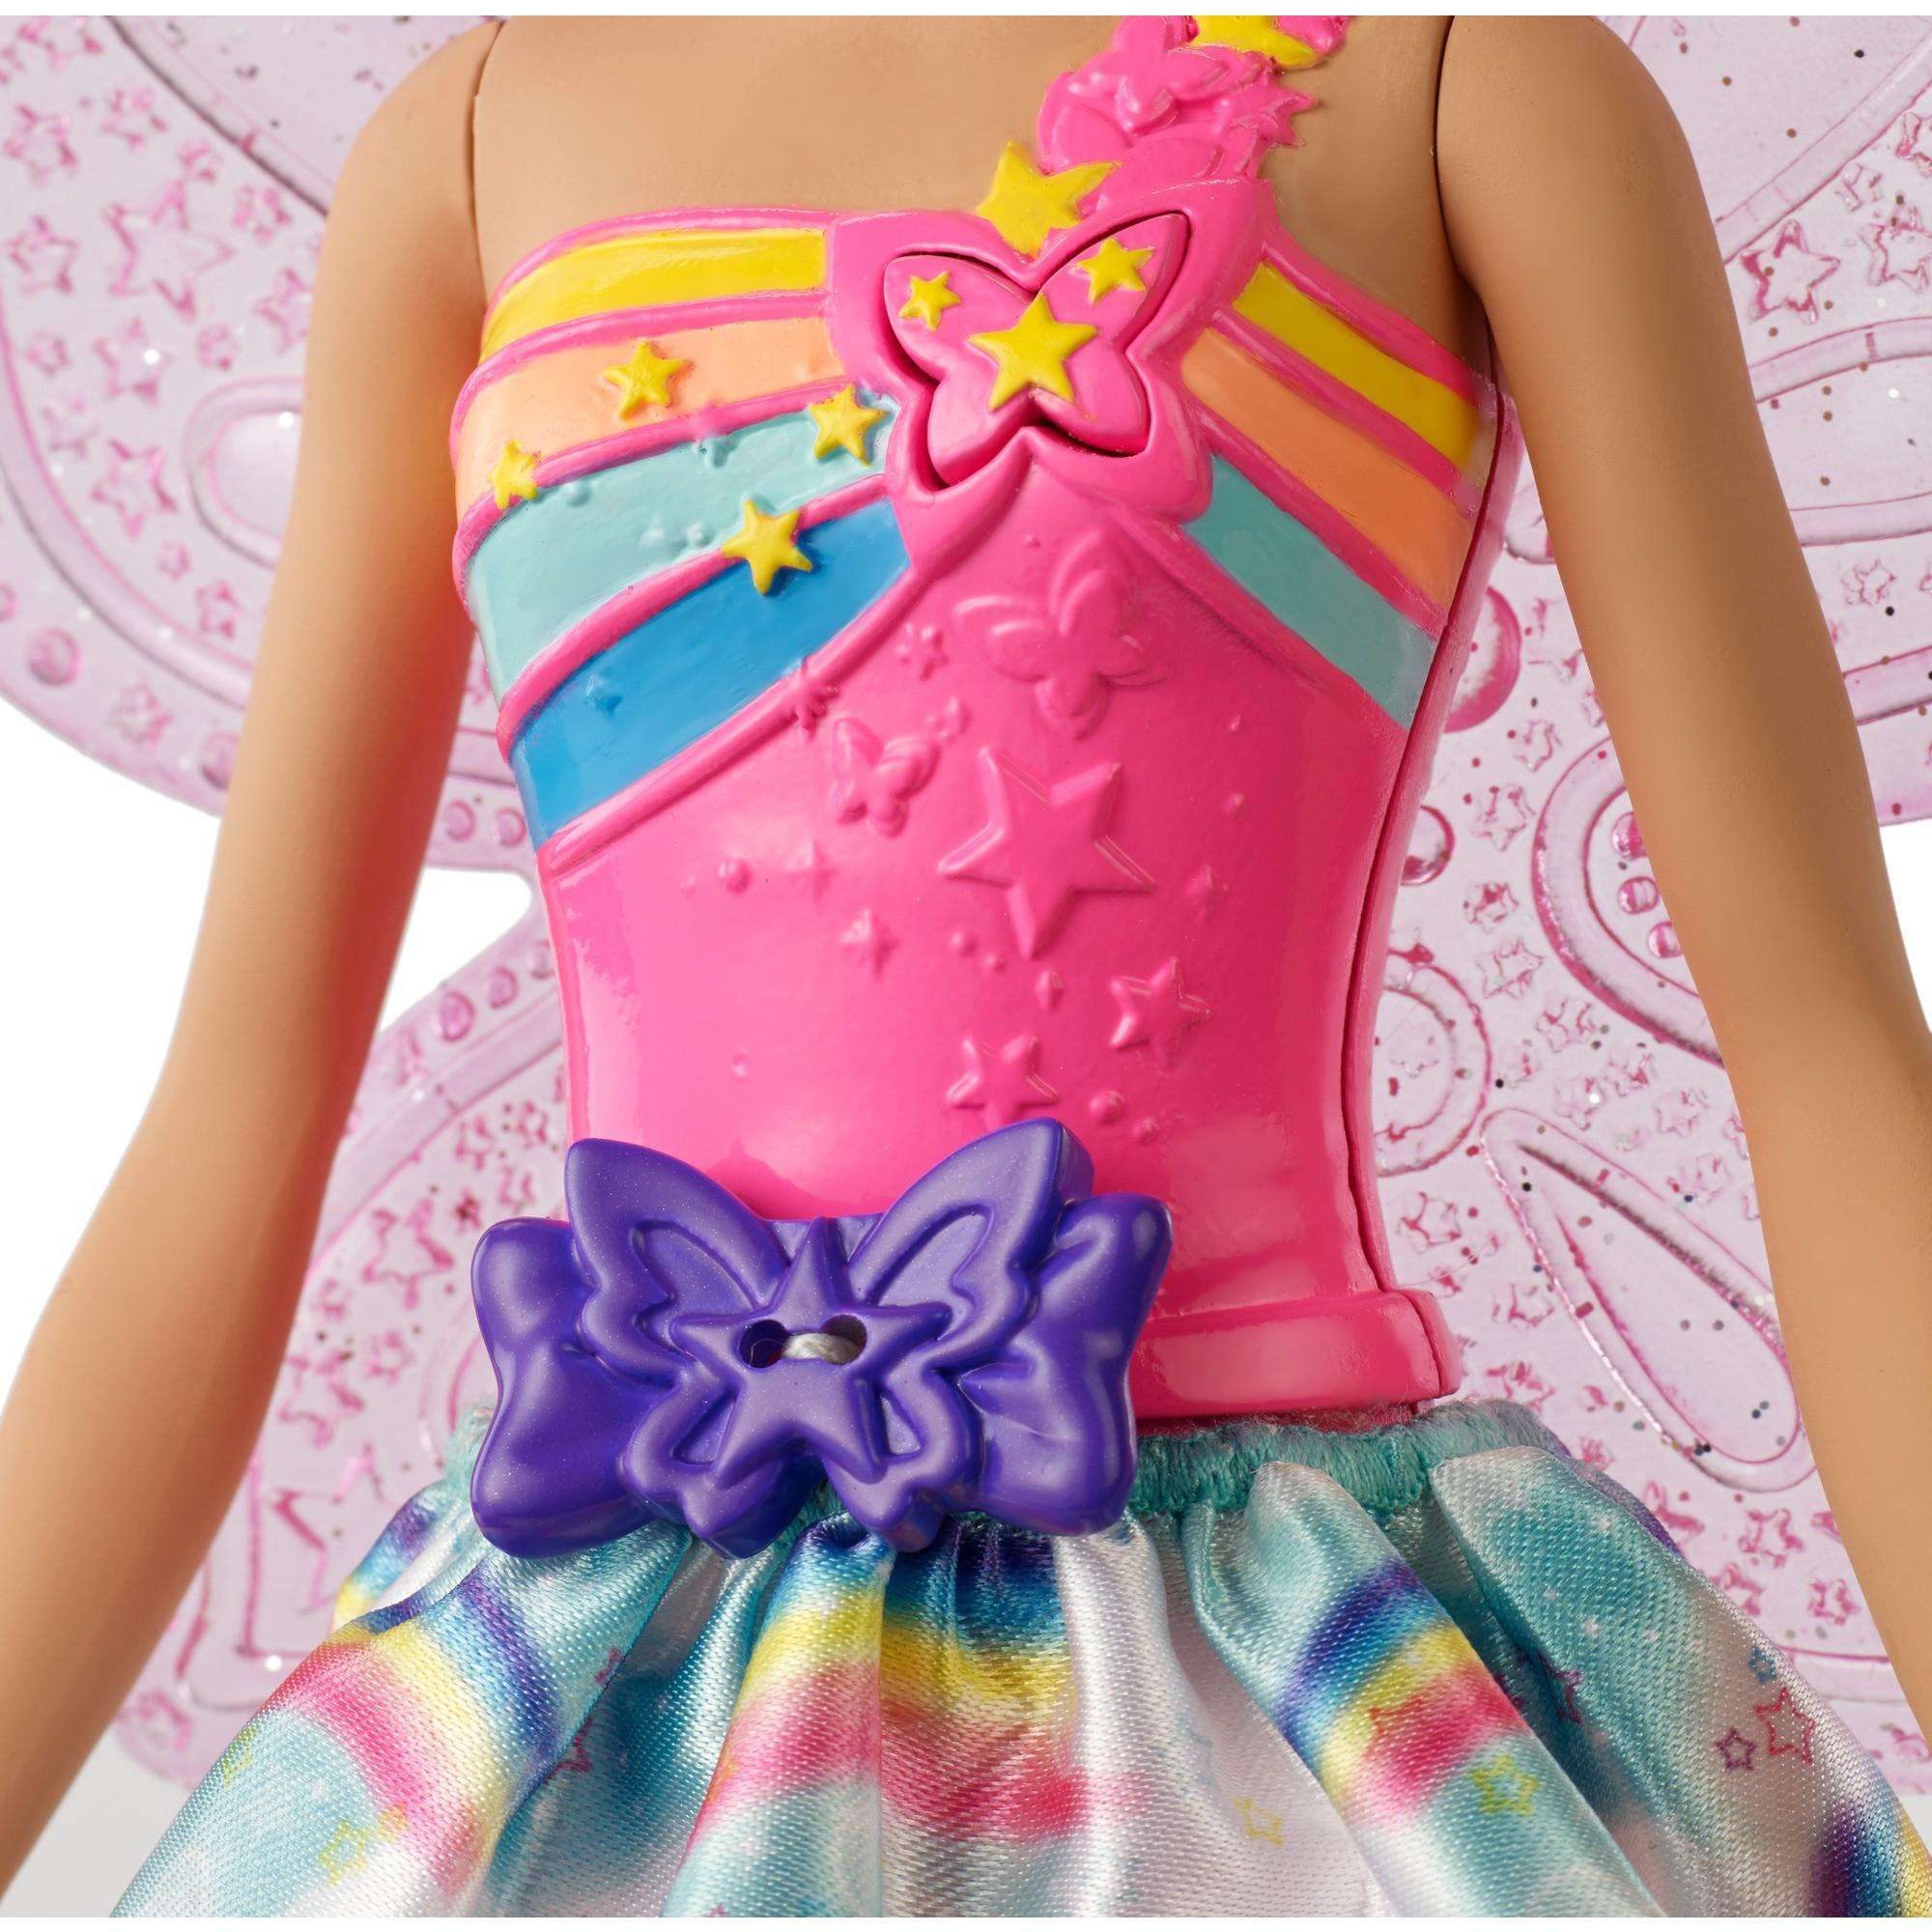 Barbie Dreamtopia Flying Wings Fairy Doll with Blonde Hair - image 8 of 11